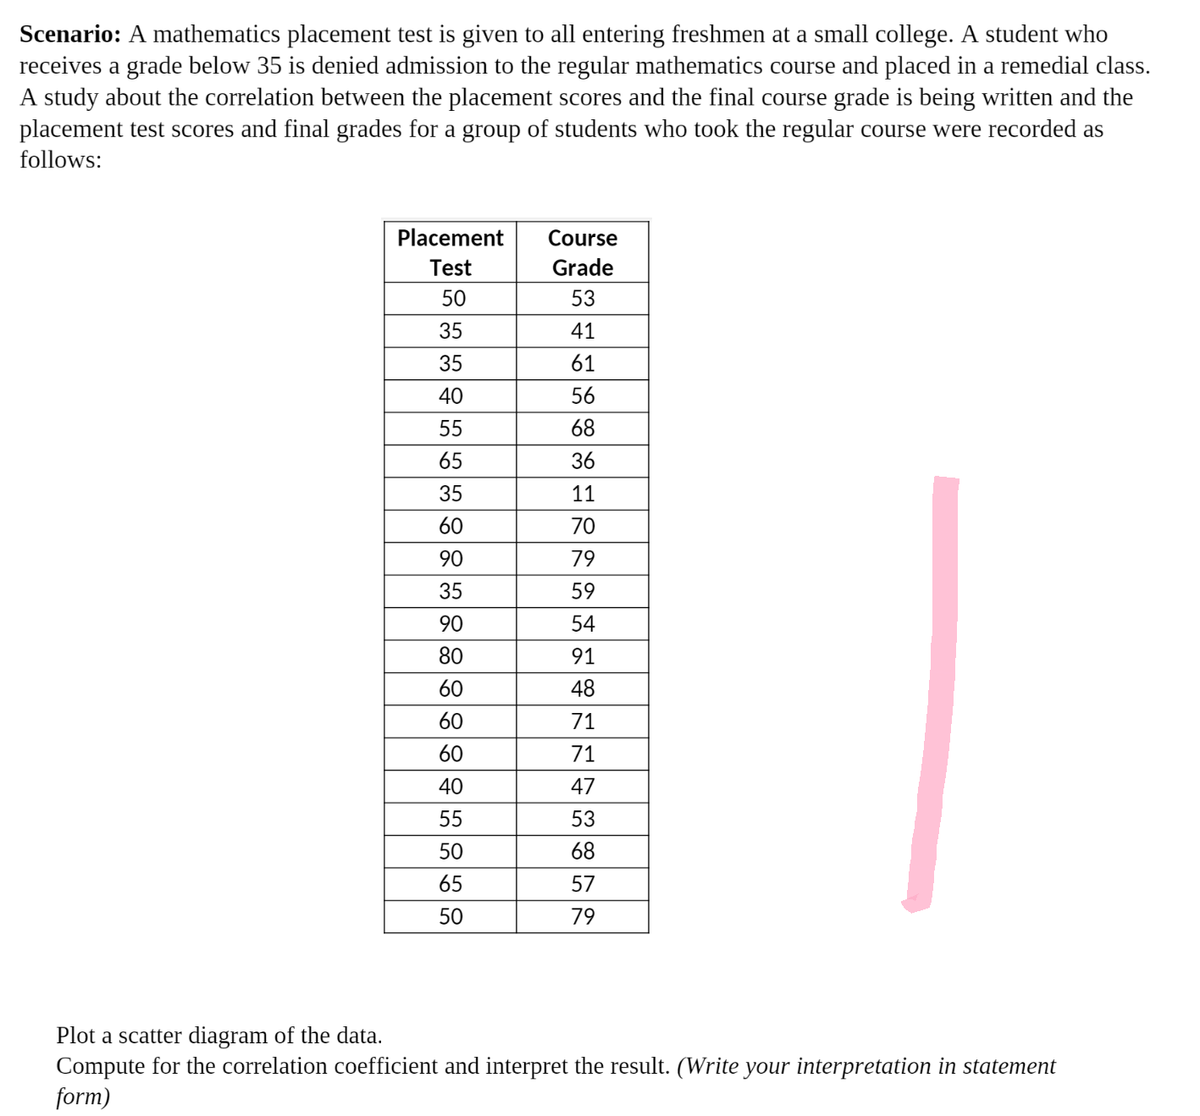 Scenario: A mathematics placement test is given to all entering freshmen at a small college. A student who
receives a grade below 35 is denied admission to the regular mathematics course and placed in a remedial class.
A study about the correlation between the placement scores and the final course grade is being written and the
placement test scores and final grades for a group of students who took the regular course were recorded as
follows:
Placement
Course
Test
Grade
50
53
35
41
35
61
40
56
55
68
65
36
35
11
60
70
90
79
35
59
90
54
80
91
60
48
60
71
60
71
40
47
55
53
50
68
65
57
50
79
Plot a scatter diagram of the data.
Compute for the correlation coefficient and interpret the result. (Write your interpretation in statement
form)